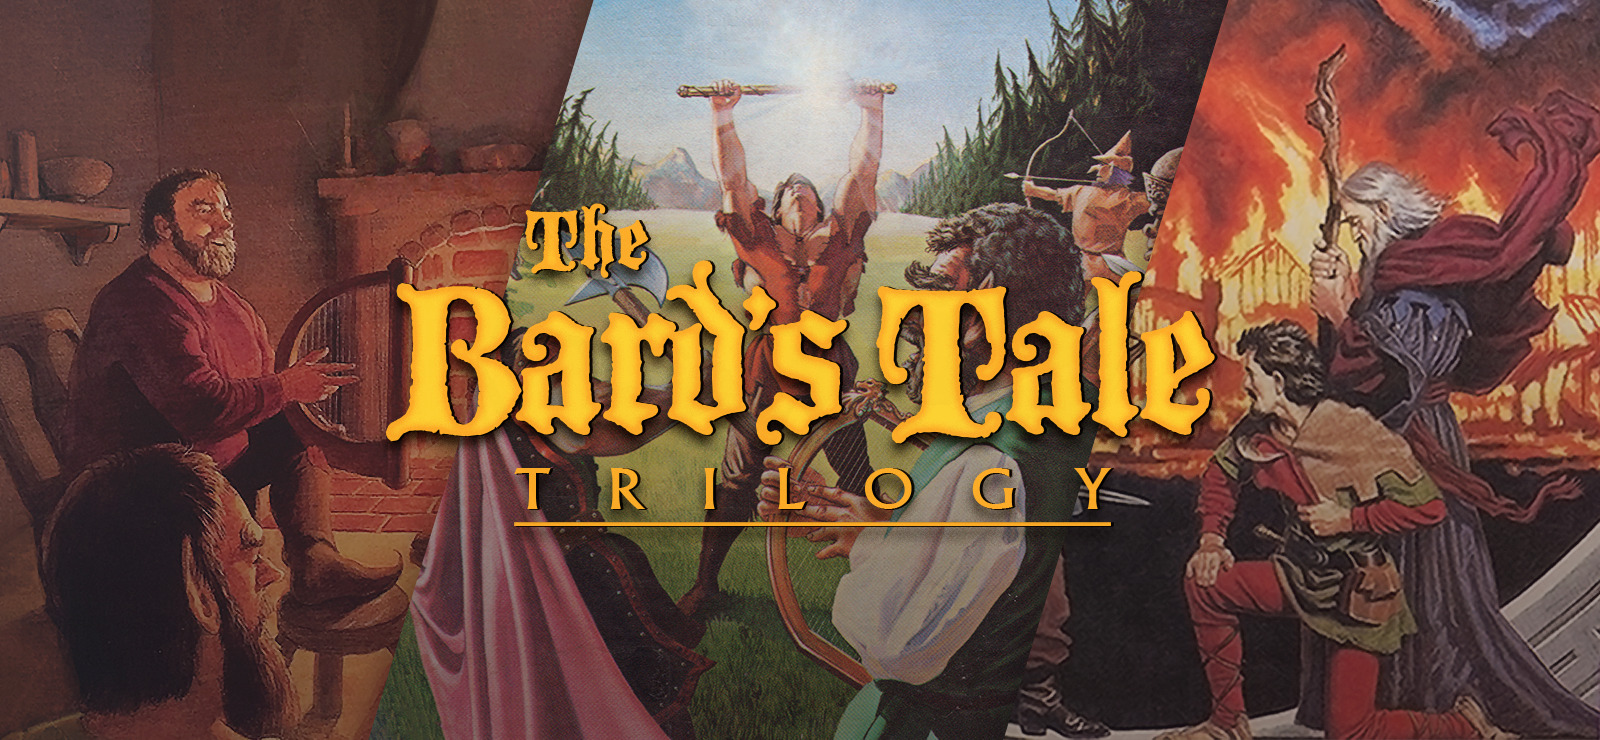 where are the bards tale trillogy saves game files